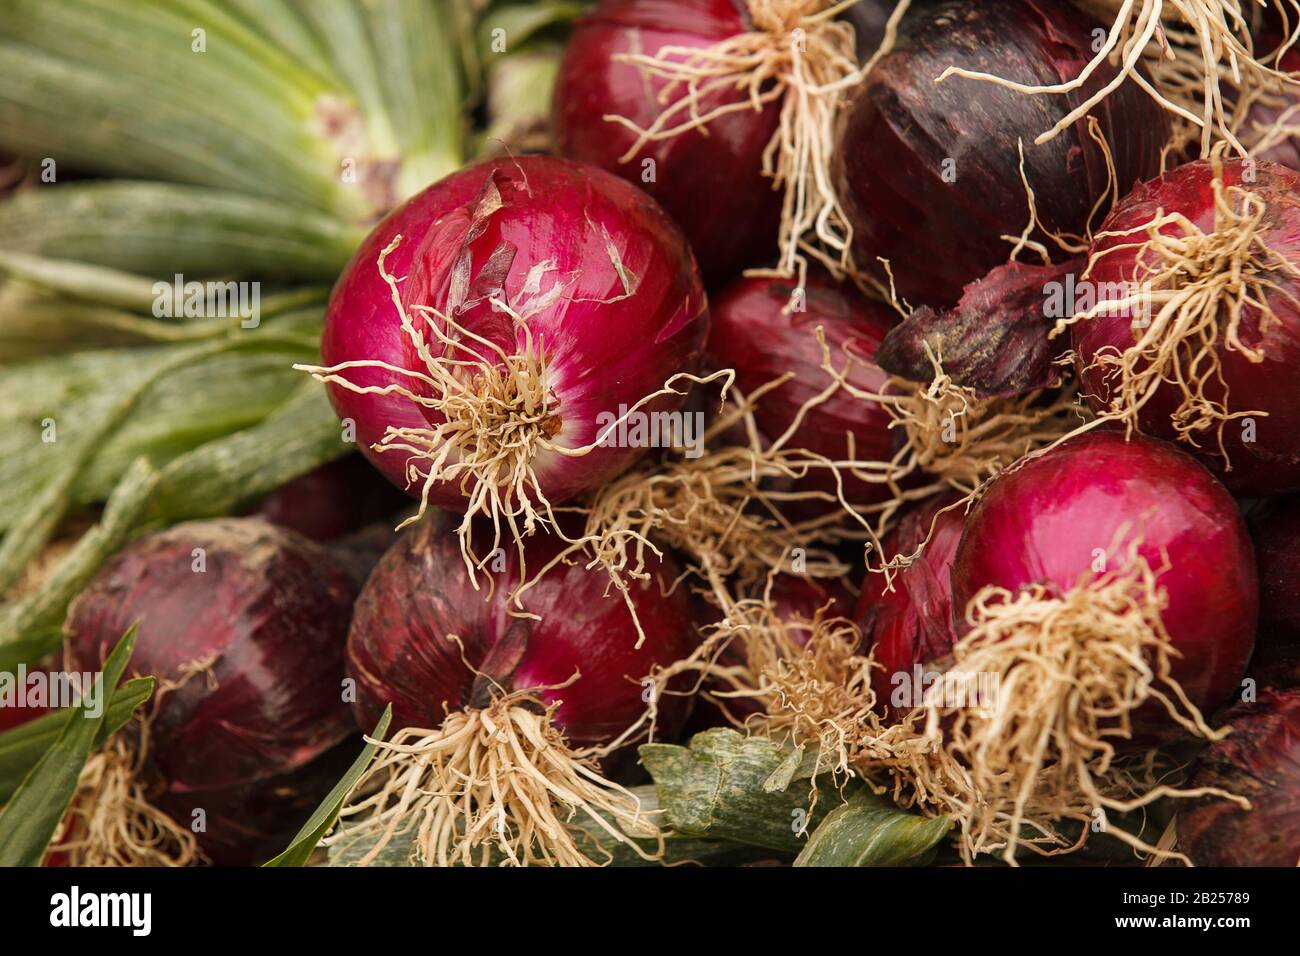 Close up of red onions at a farmersÕ market Stock Photo